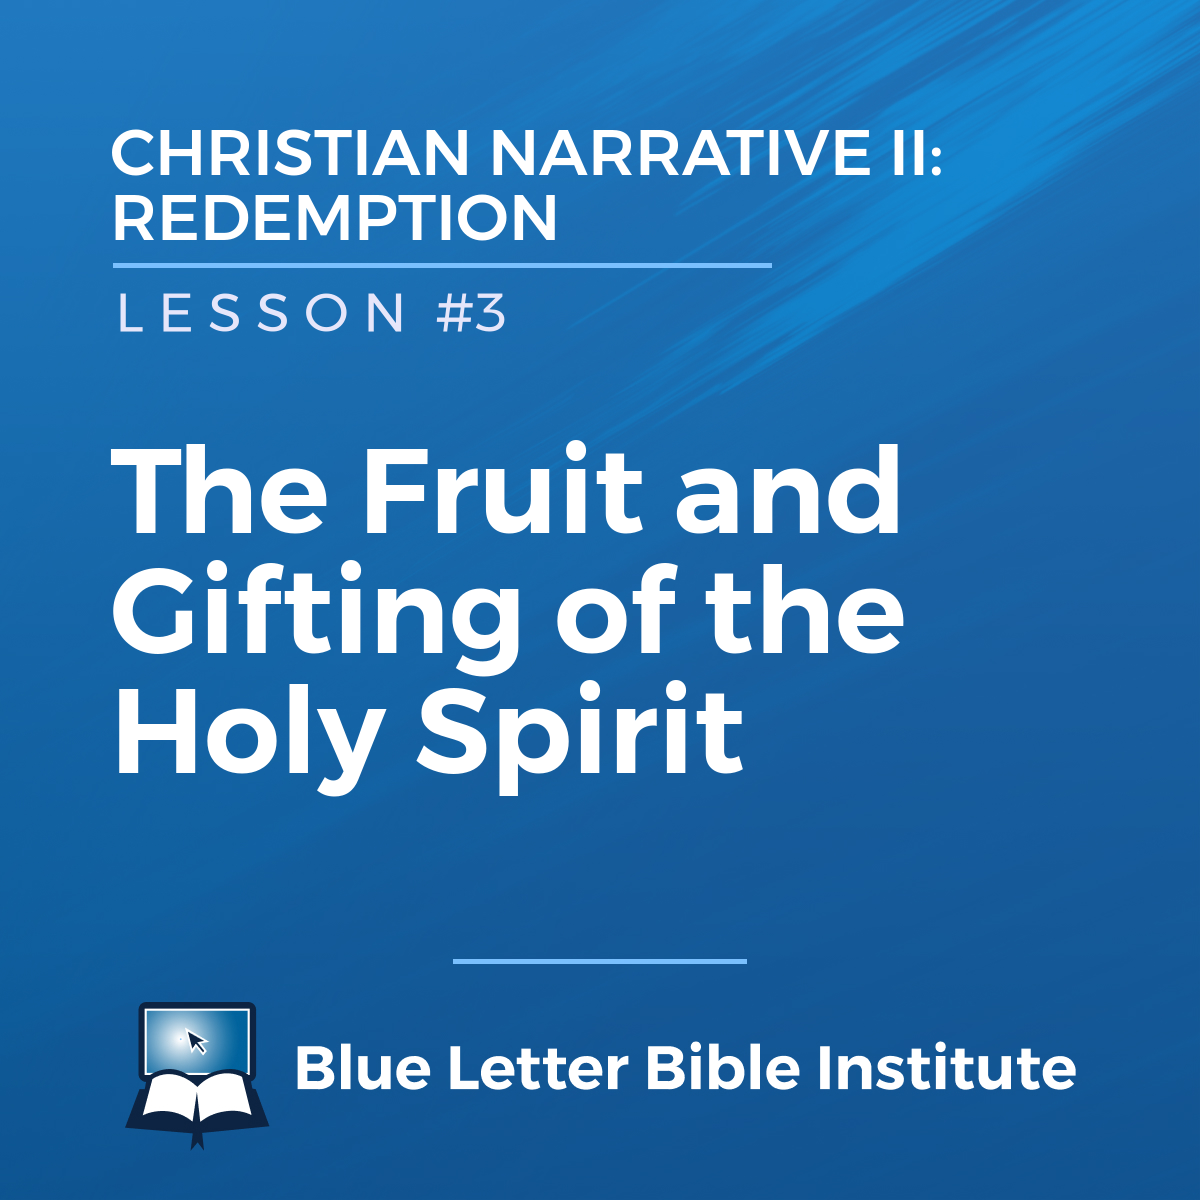  Faith Based Gifts by ADS Fruit of The Spirit Galatians